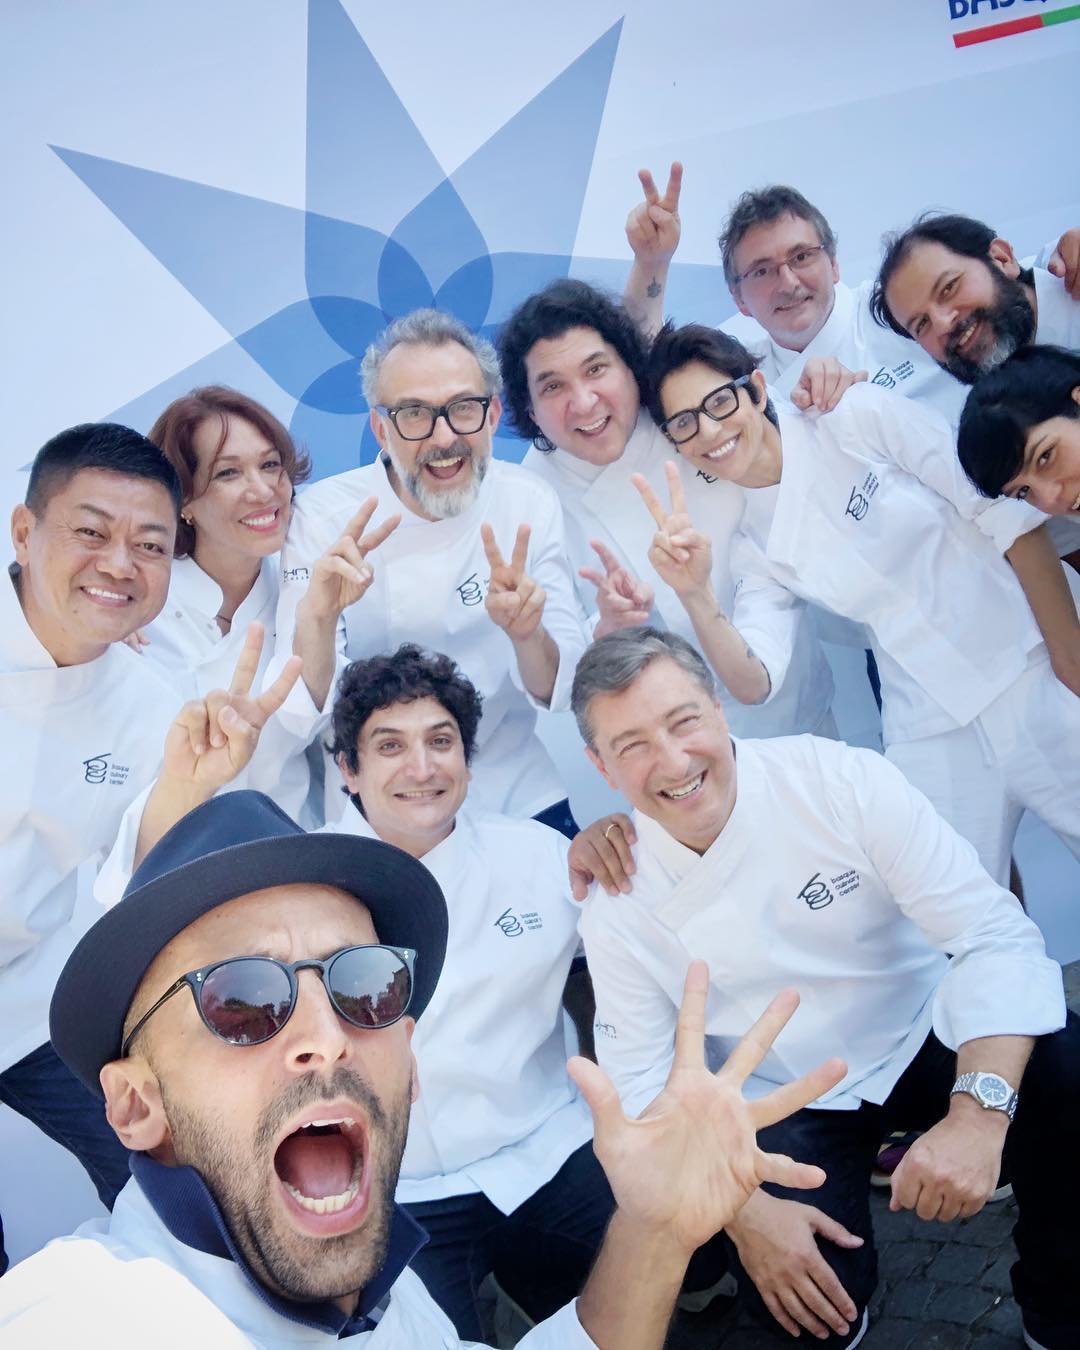 JR, bottom left, at the Basque Culinary World Prize